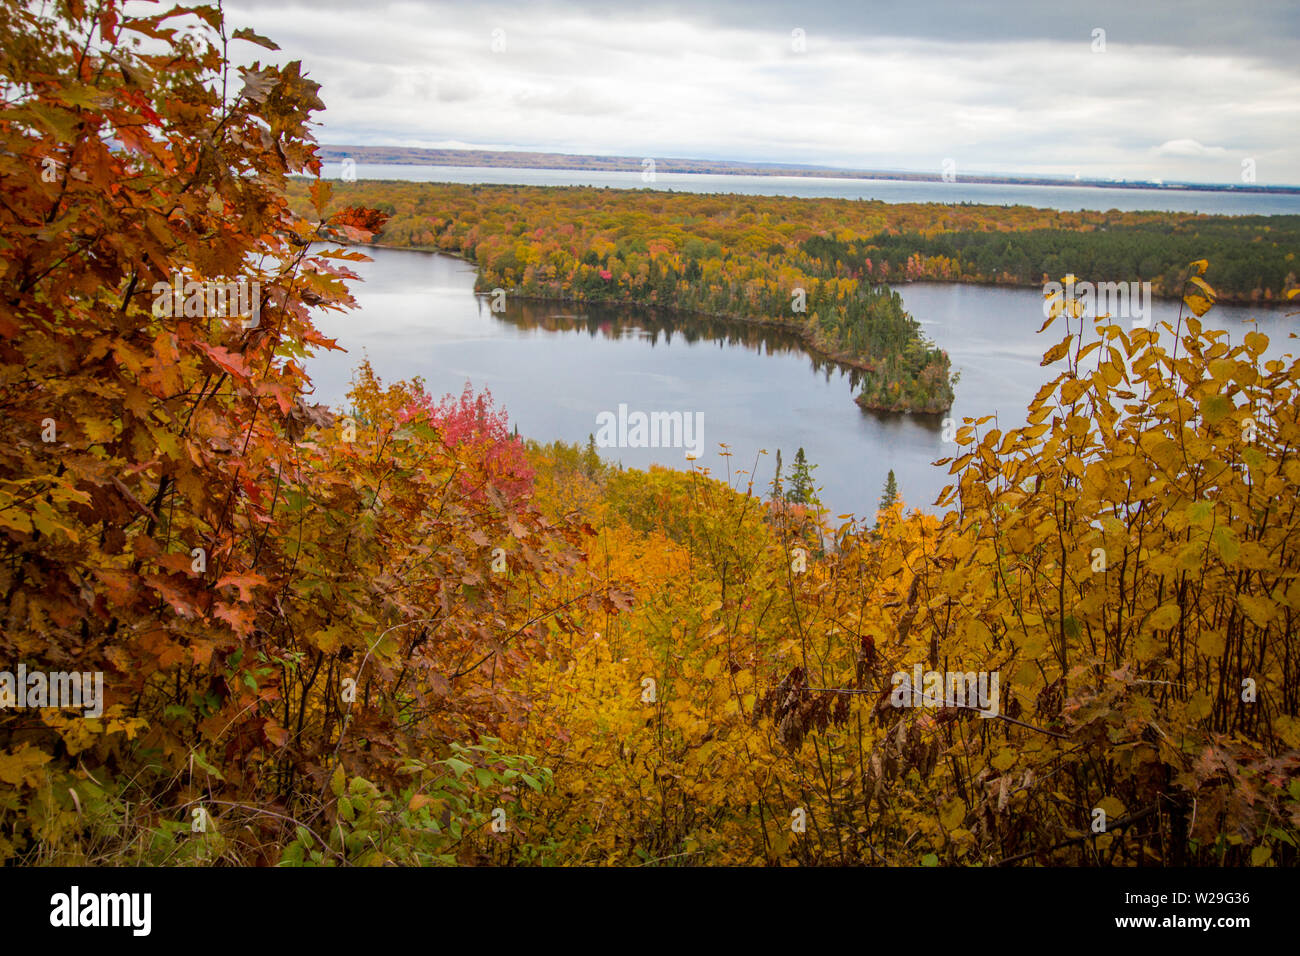 Michigan Autumn Scenic Panorama. Vibrant autumn color in the northern Michigan forest with the vast blue waters of Lake Superior in the background. Stock Photo